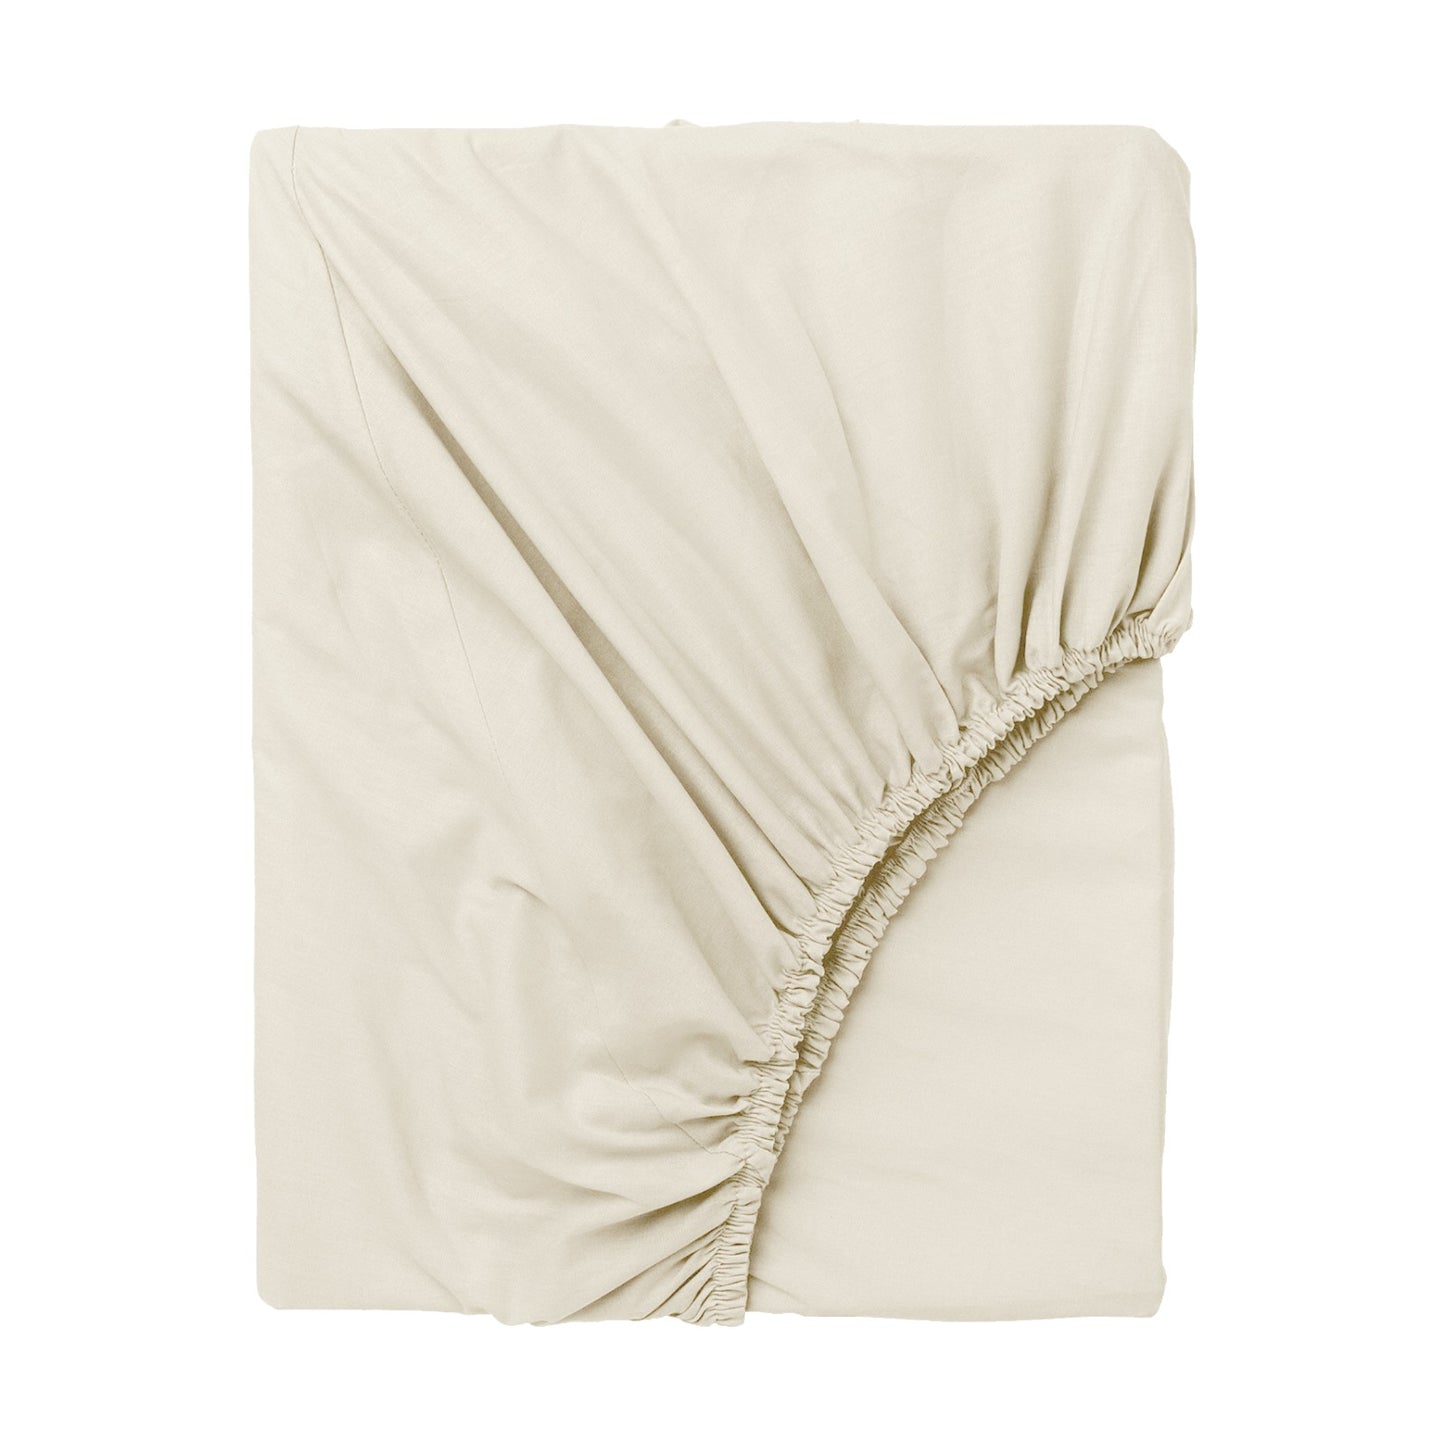 Beige - Fitted sheet - 3 PCS King size